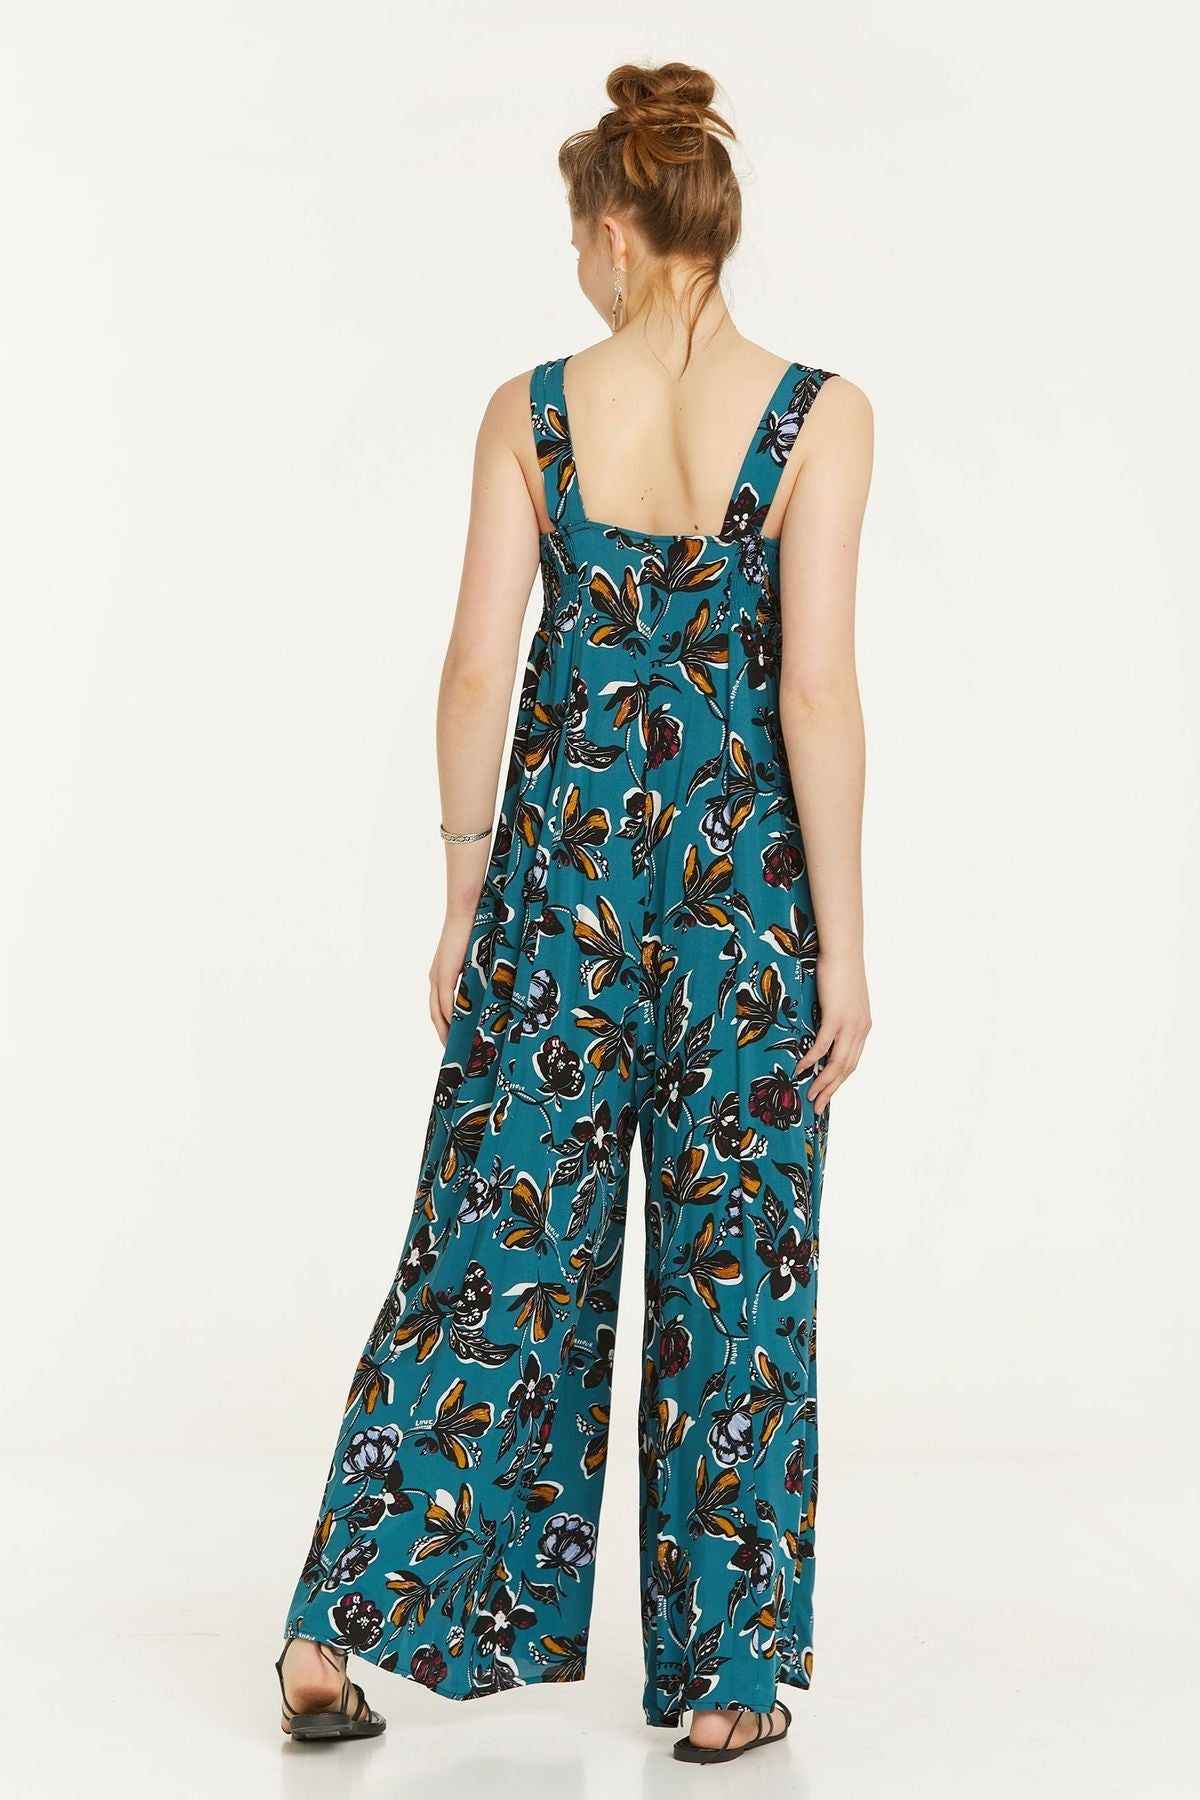 Flower Print Flowy Jumpsuit with Square Neck Turquoise